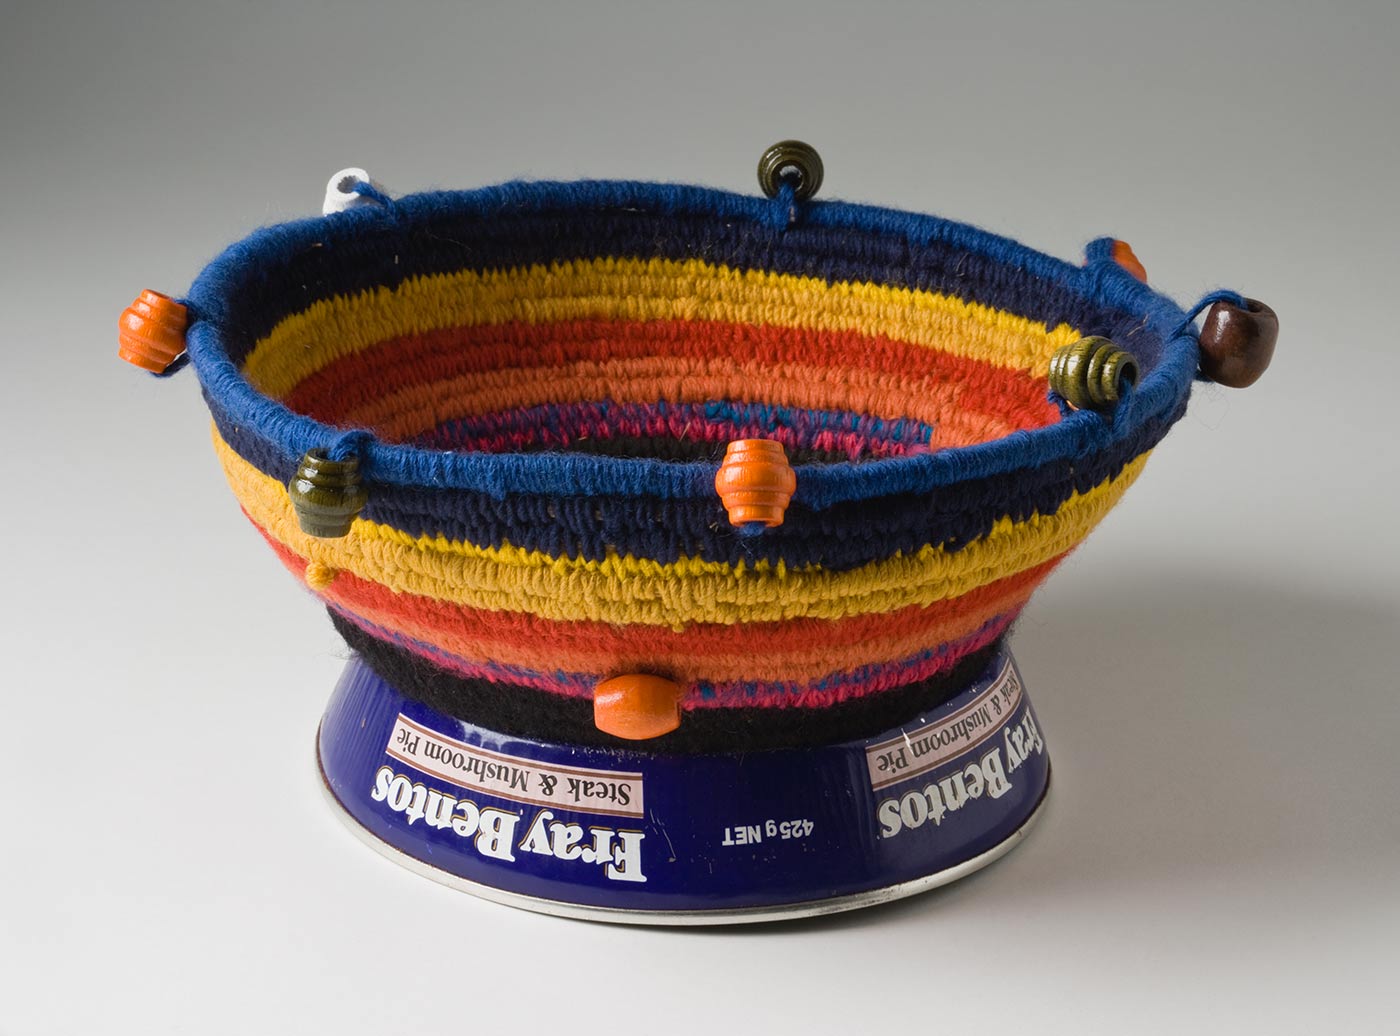 A circular coiled multicoloured yarn and plant fibre basket with a metal base and bead decoration. The base is made of a blue metal 'Fray Bento / Steak and Mushroom Pie' tin with sides, that is placed upside down. The yarn section is attached by black yarn threaded through holes punched in the metal. The closely coiled yarn is in stripes starting with blue at the top edge then yellow, red, orange, pink and black. The top edge and sides have a decoration of evenly spaced carved cylindrical wooden beads in orange, brown, green and white. - click to view larger image